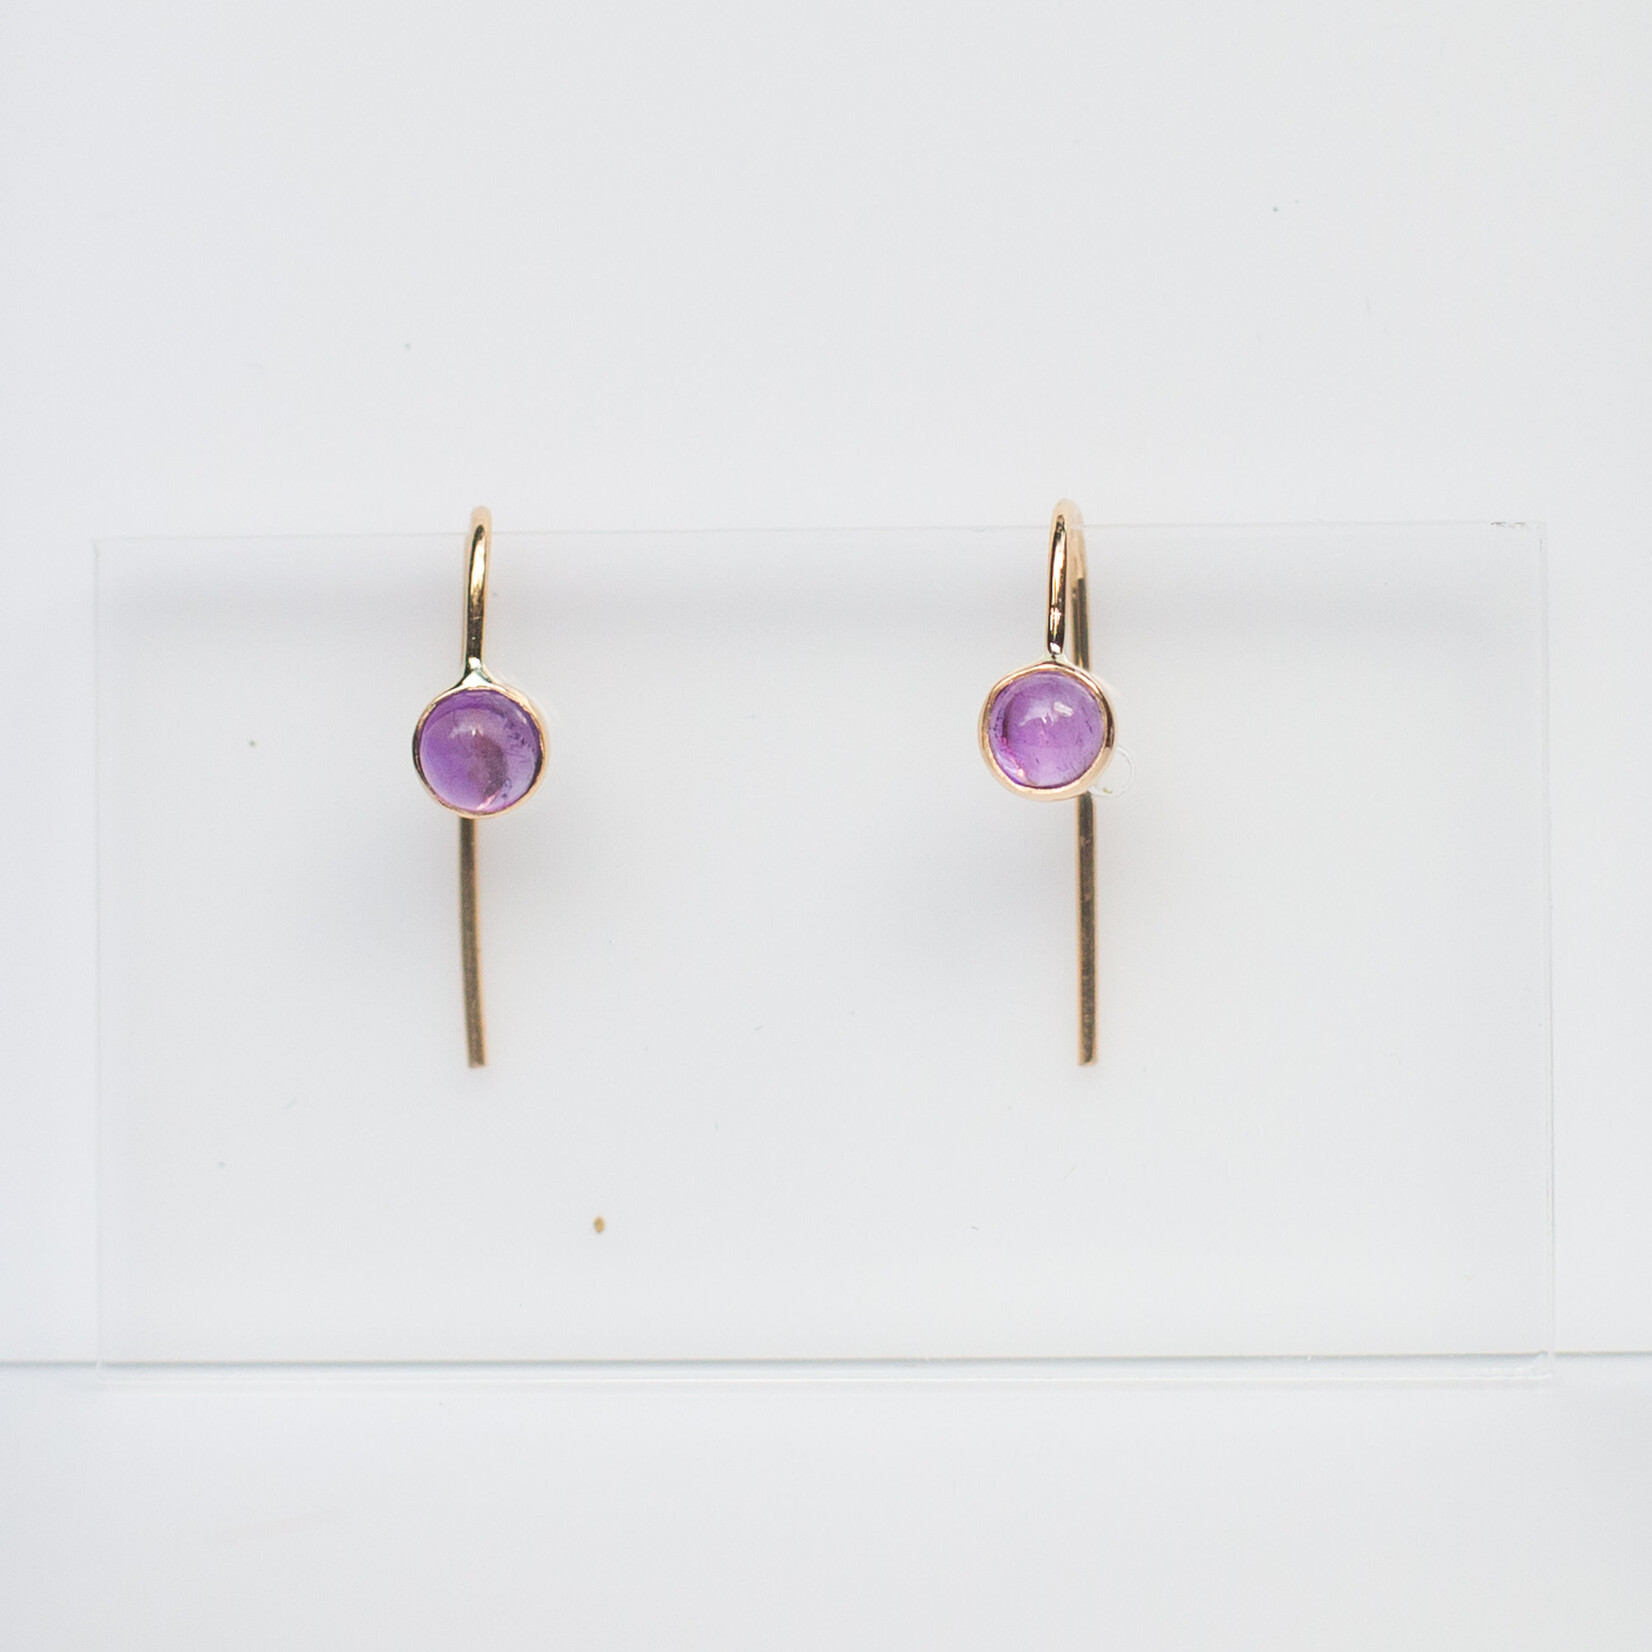 Carrie Hoffman 14k Yellow Gold 5mm Cab Slides - Amethyst - (Pair)